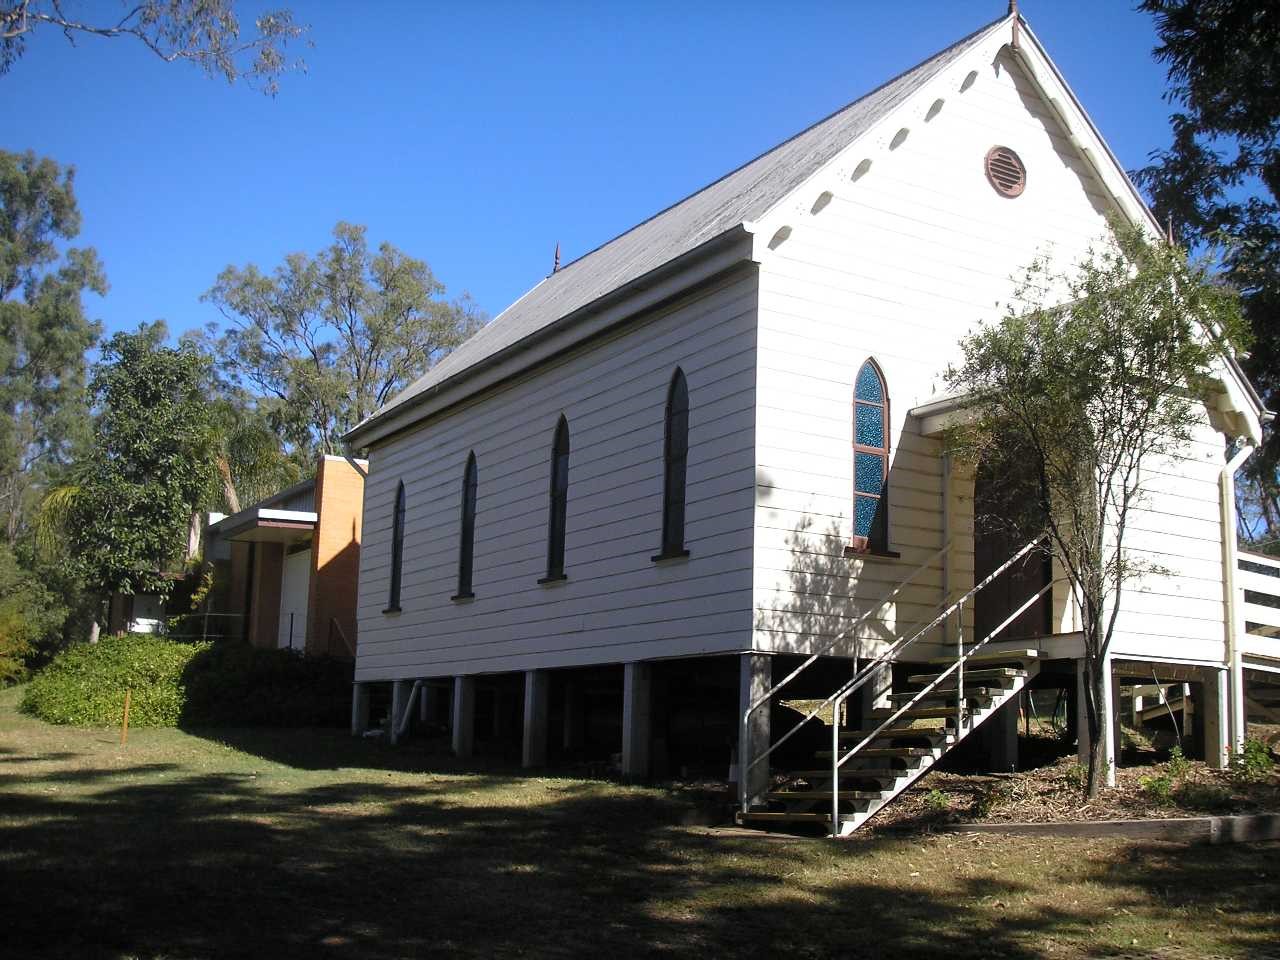 This is an image of the heritage place known as Brookfield Uniting Church